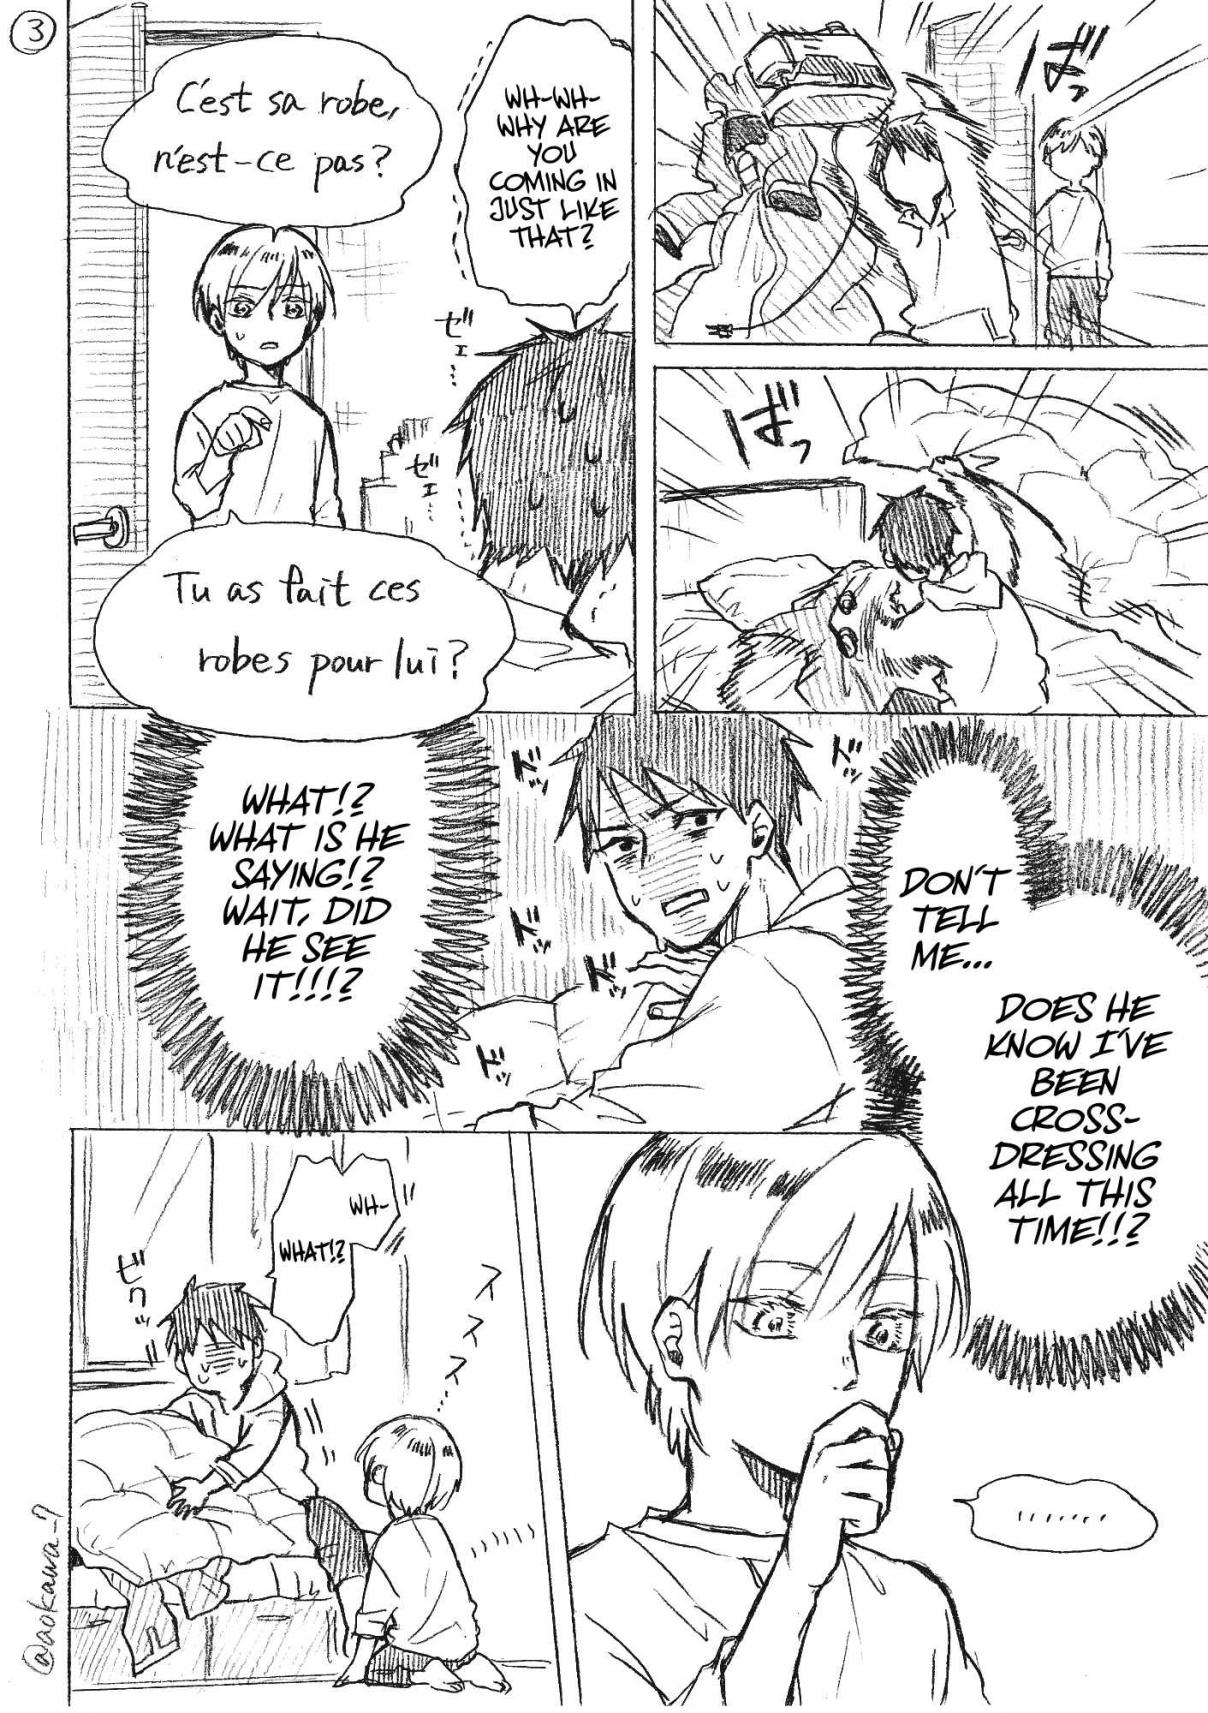 The Manga Where a Crossdressing Cosplayer Gets a Brother Ch. 2.2 Part 5